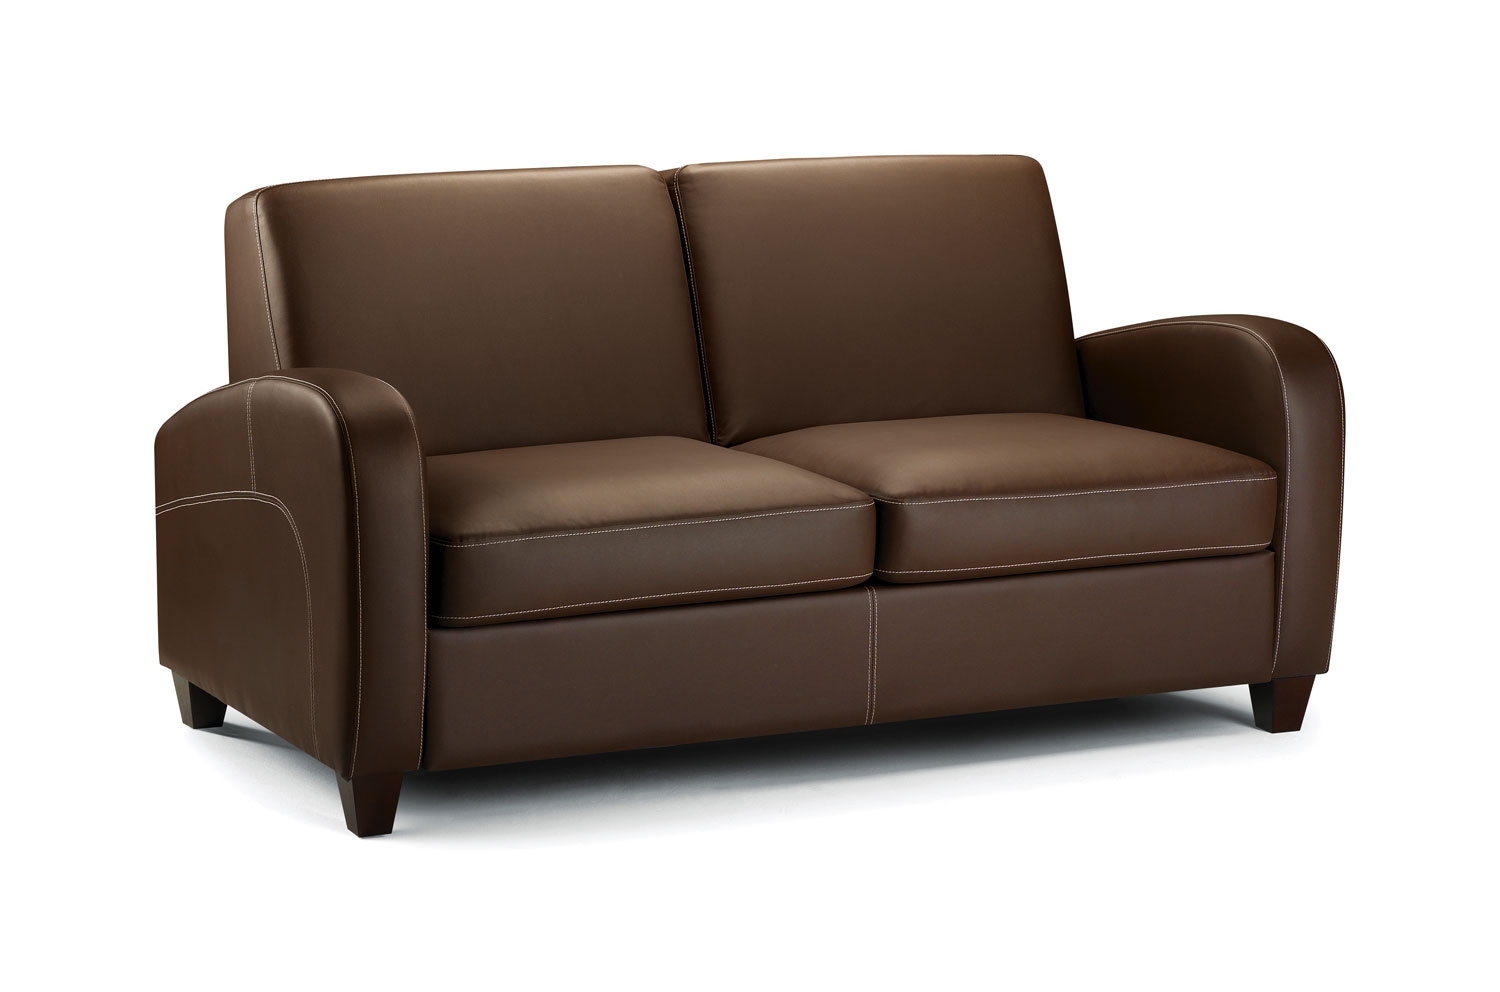 Vivo Chestnut Brown Faux Leather Sofa Bed